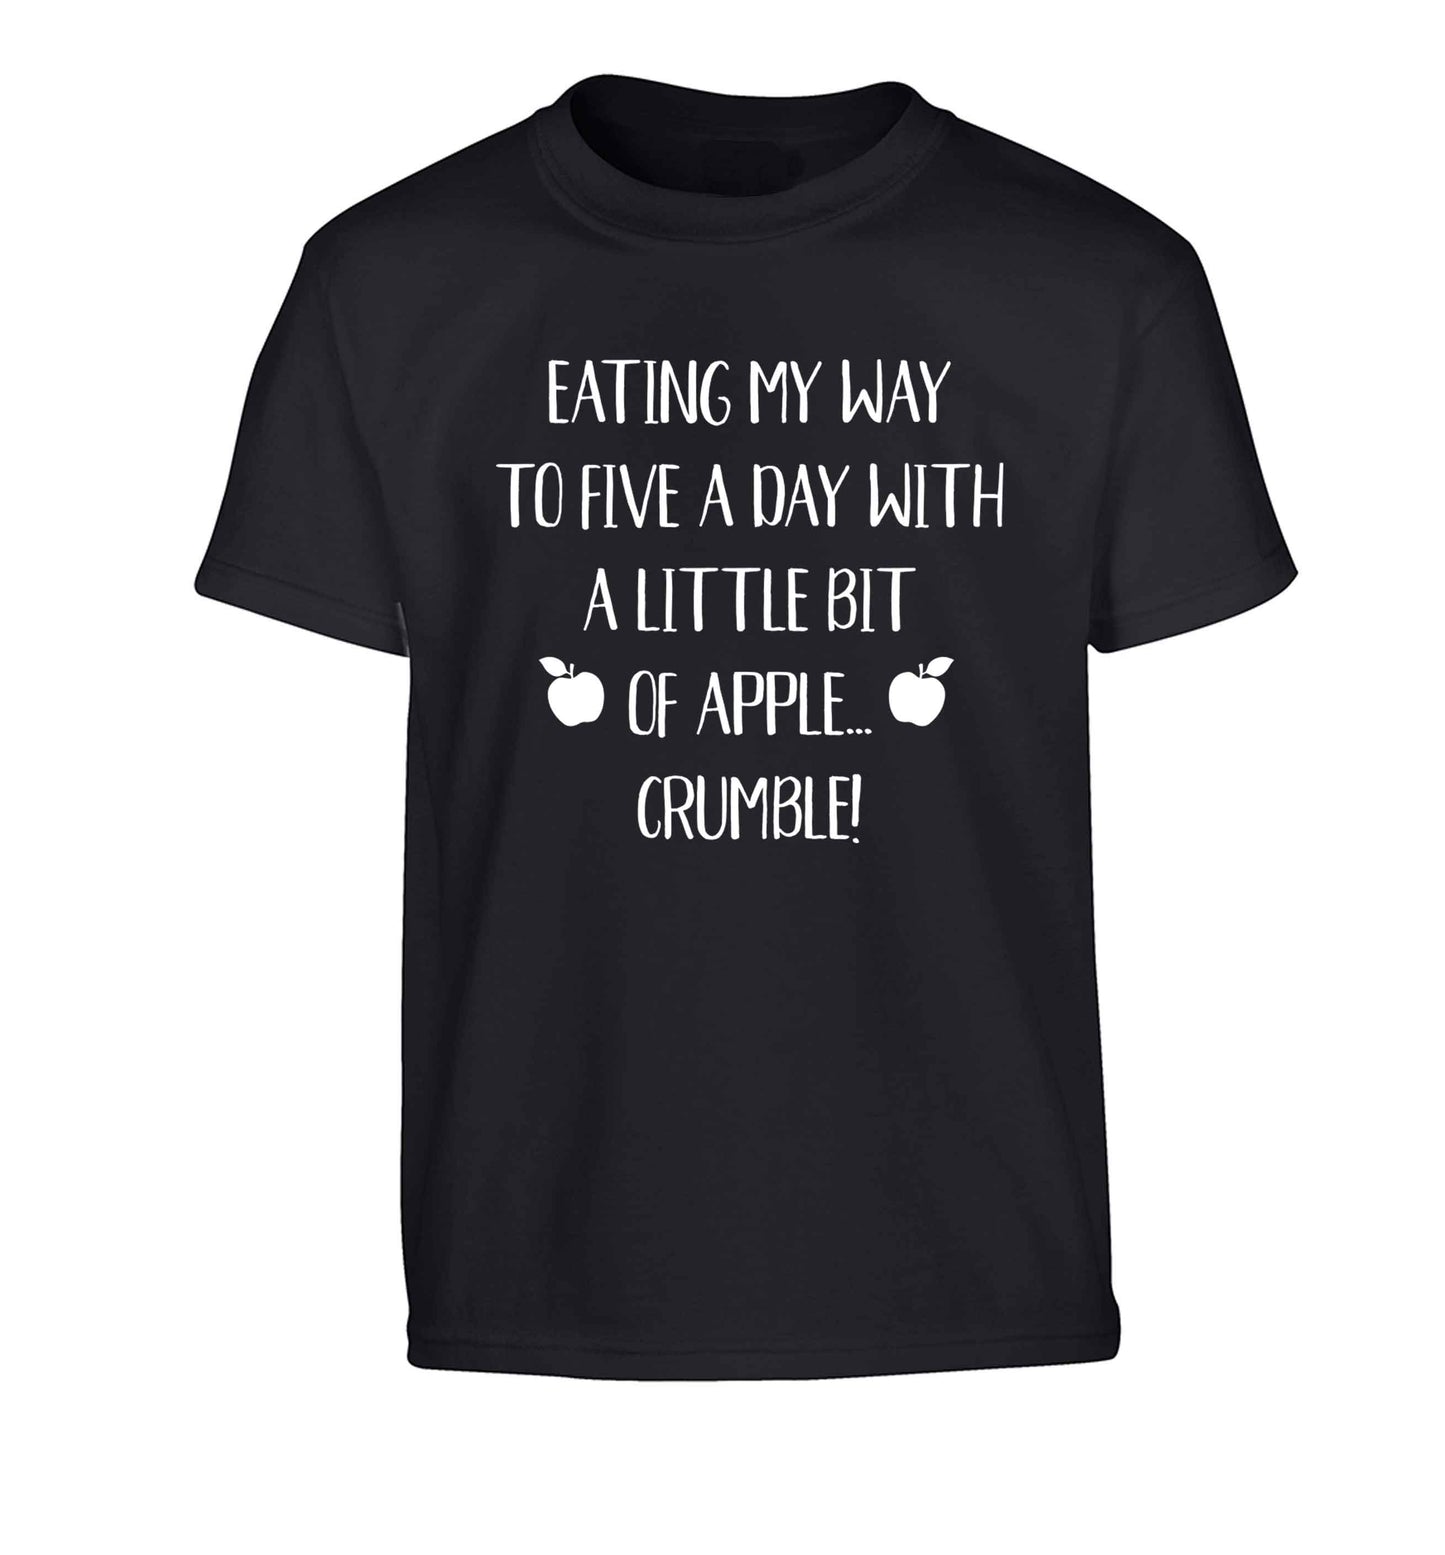 Eating my way to five a day with a little bit of apple crumble Children's black Tshirt 12-13 Years